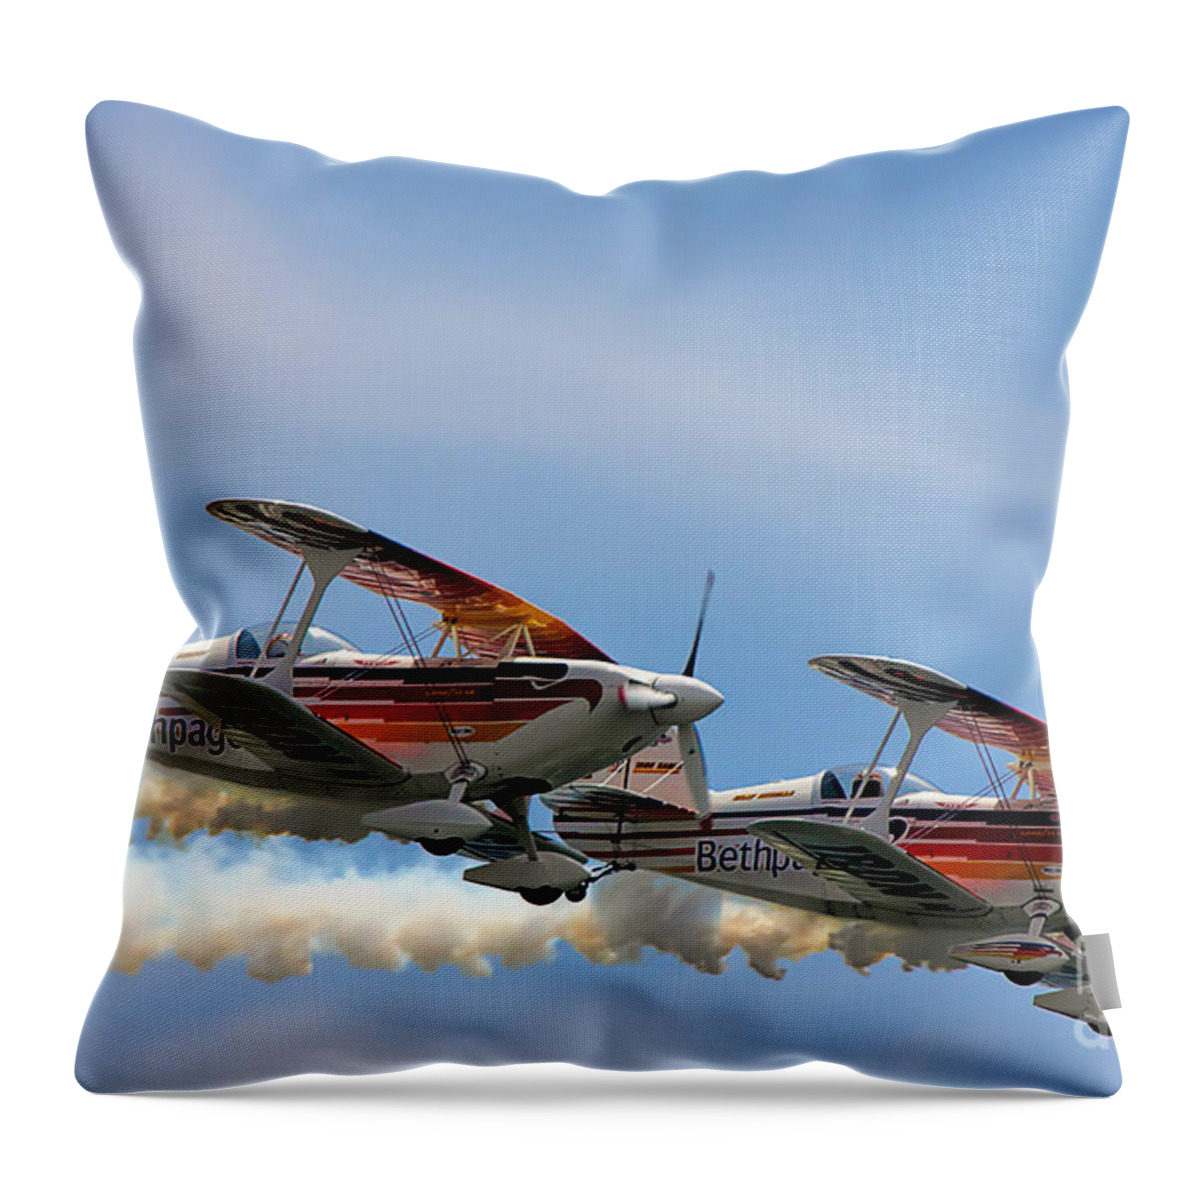 Iron Eagle Throw Pillow featuring the photograph Double Iron Eagles by Rick Kuperberg Sr